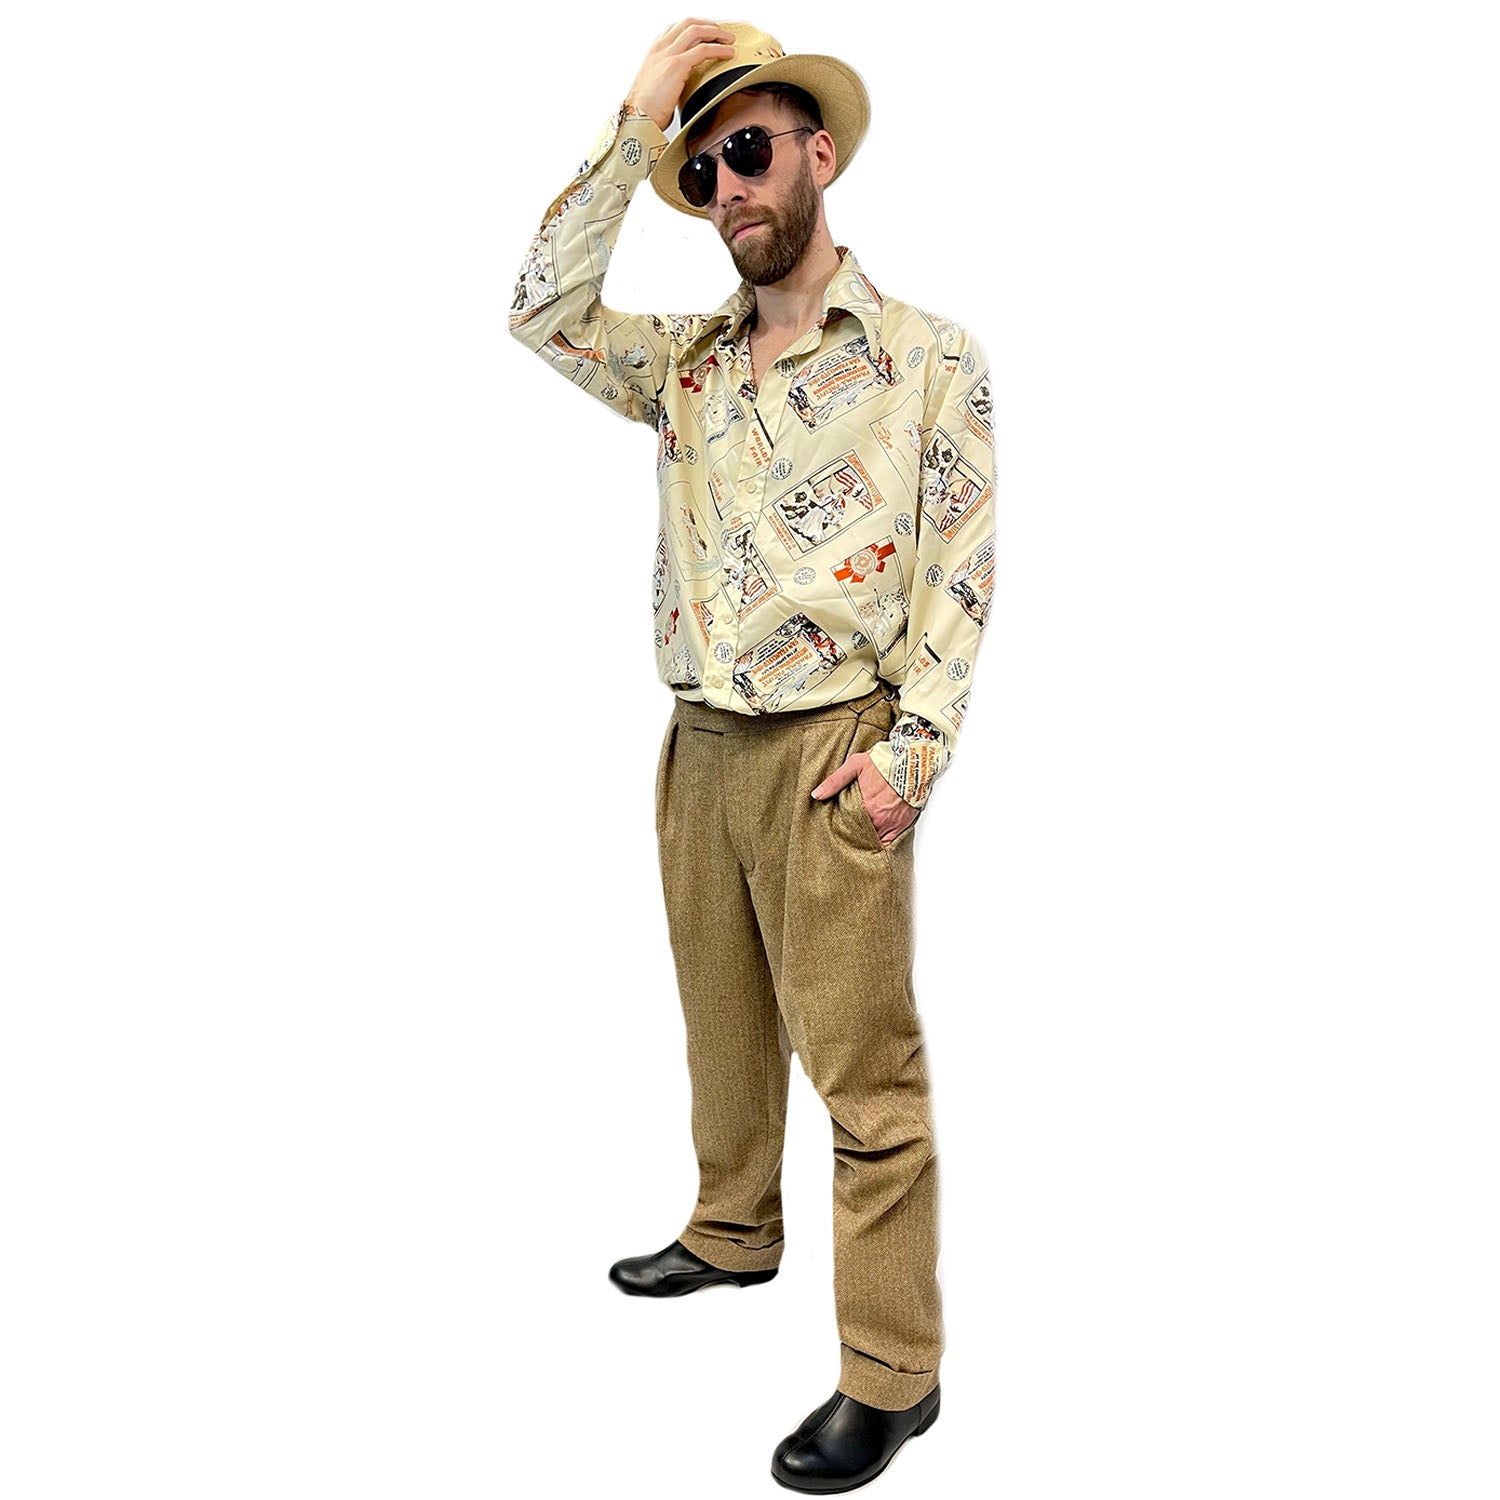 1970's Resort Tourist Outfit Adult Costume